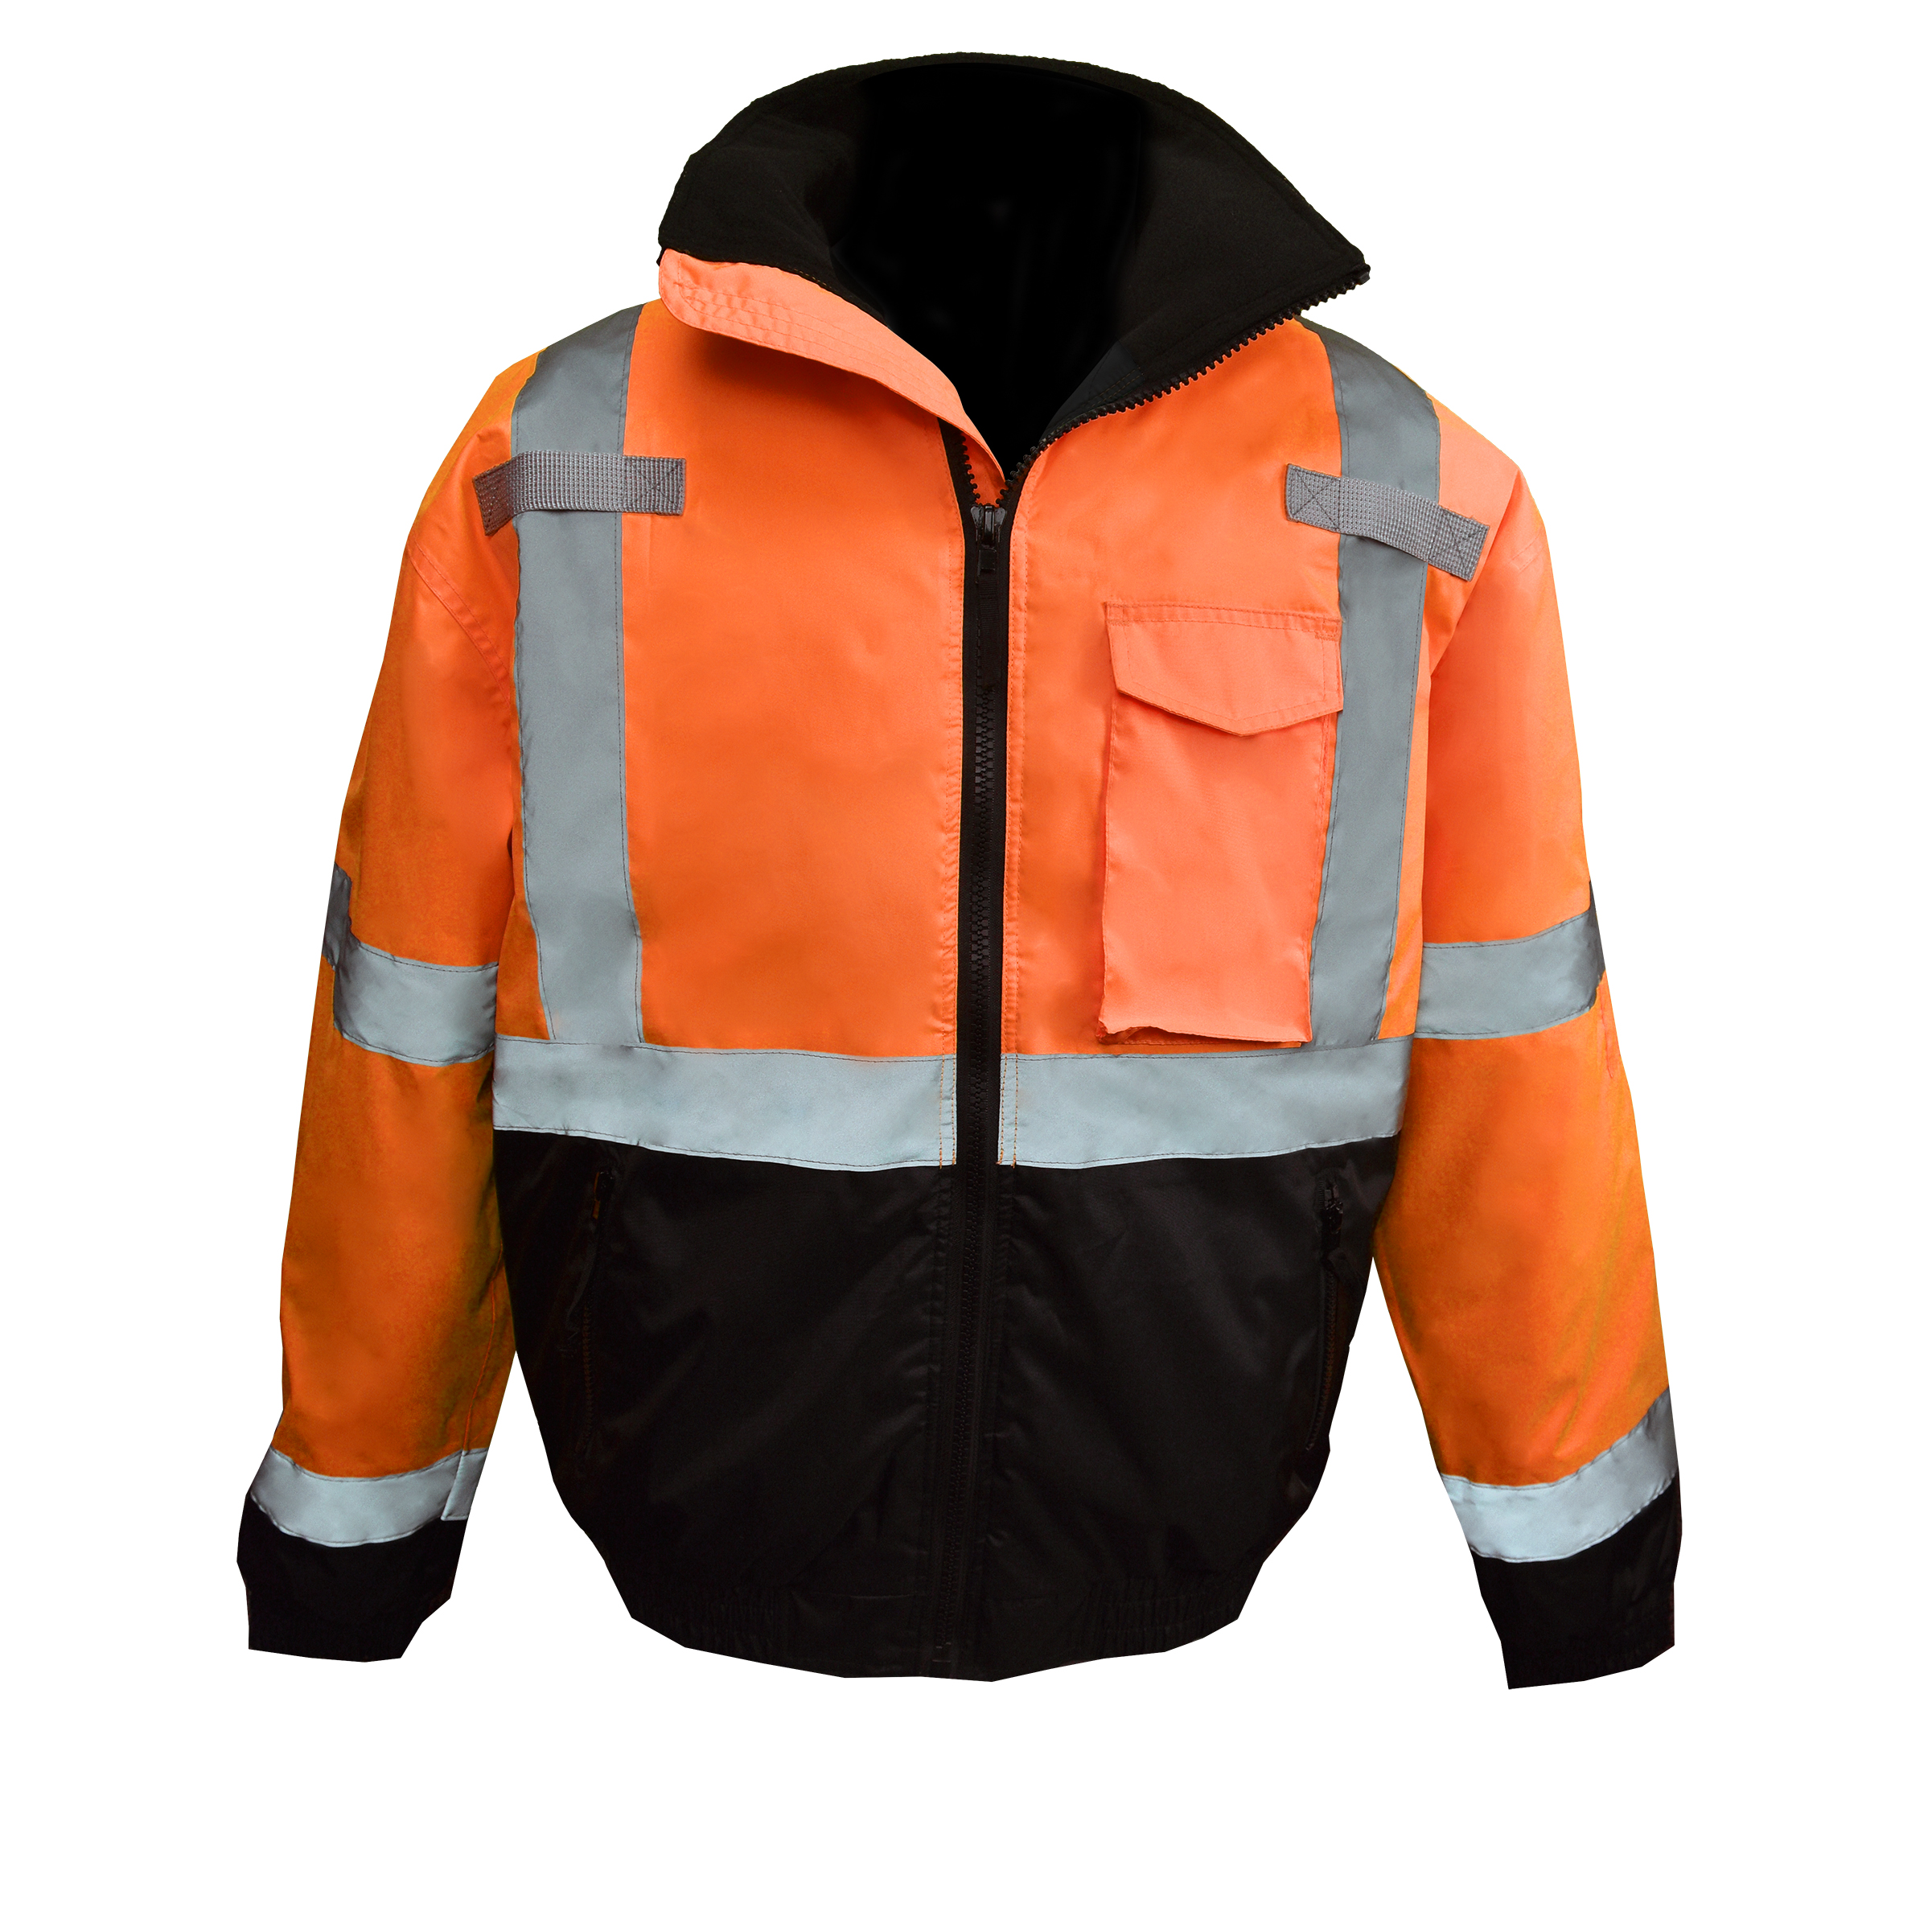 SJ11QB Class3 High Visibility Weatherproof Bomber Jacket with Quilted Built-in Liner - Orange - Size L